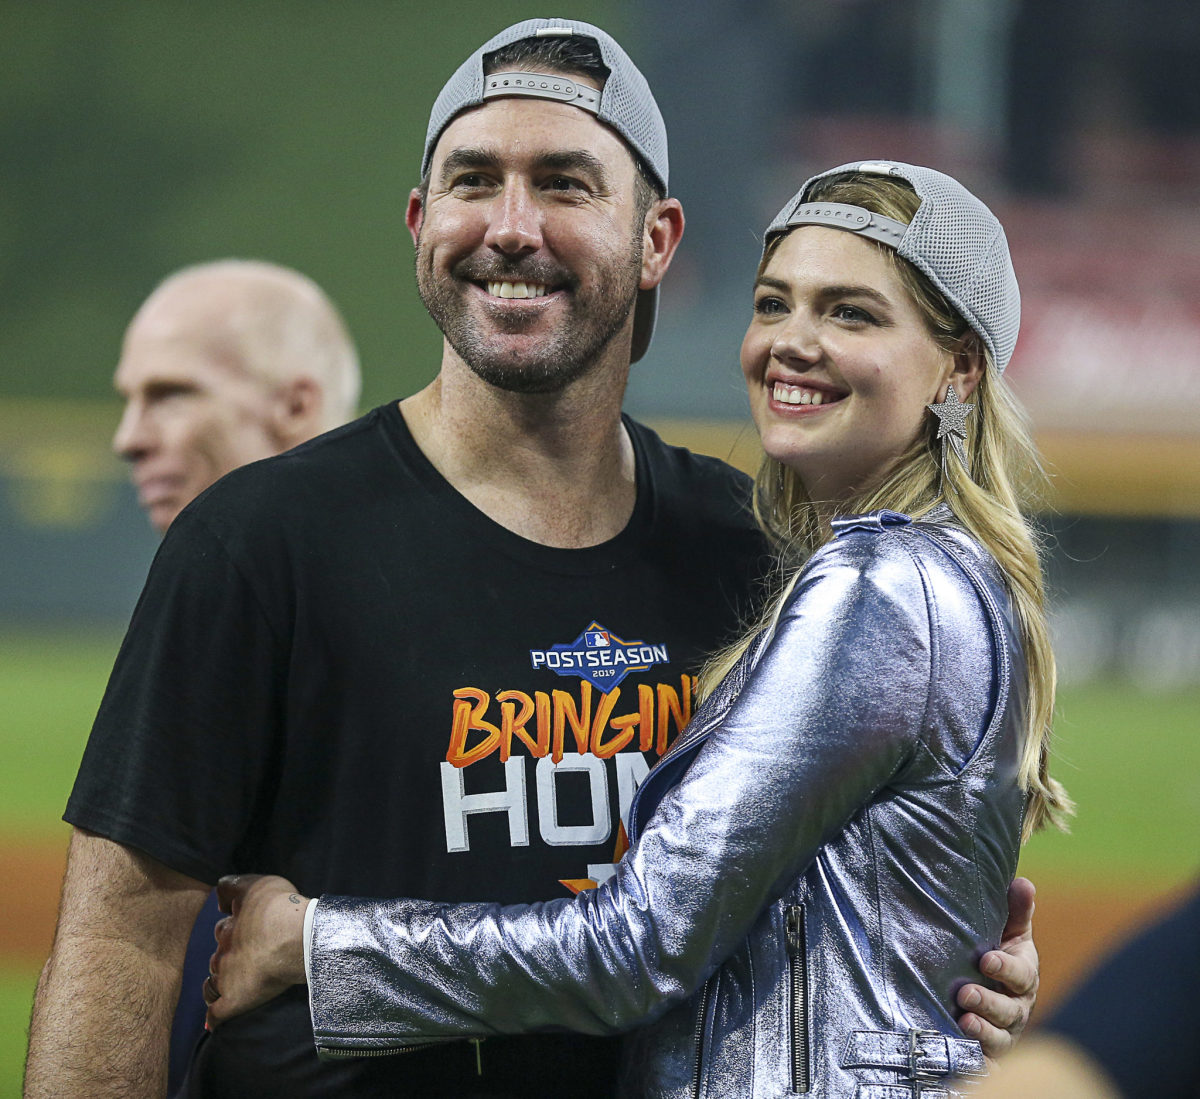 Video: Kate Upton Went Viral During The Astros' Win - The Spun